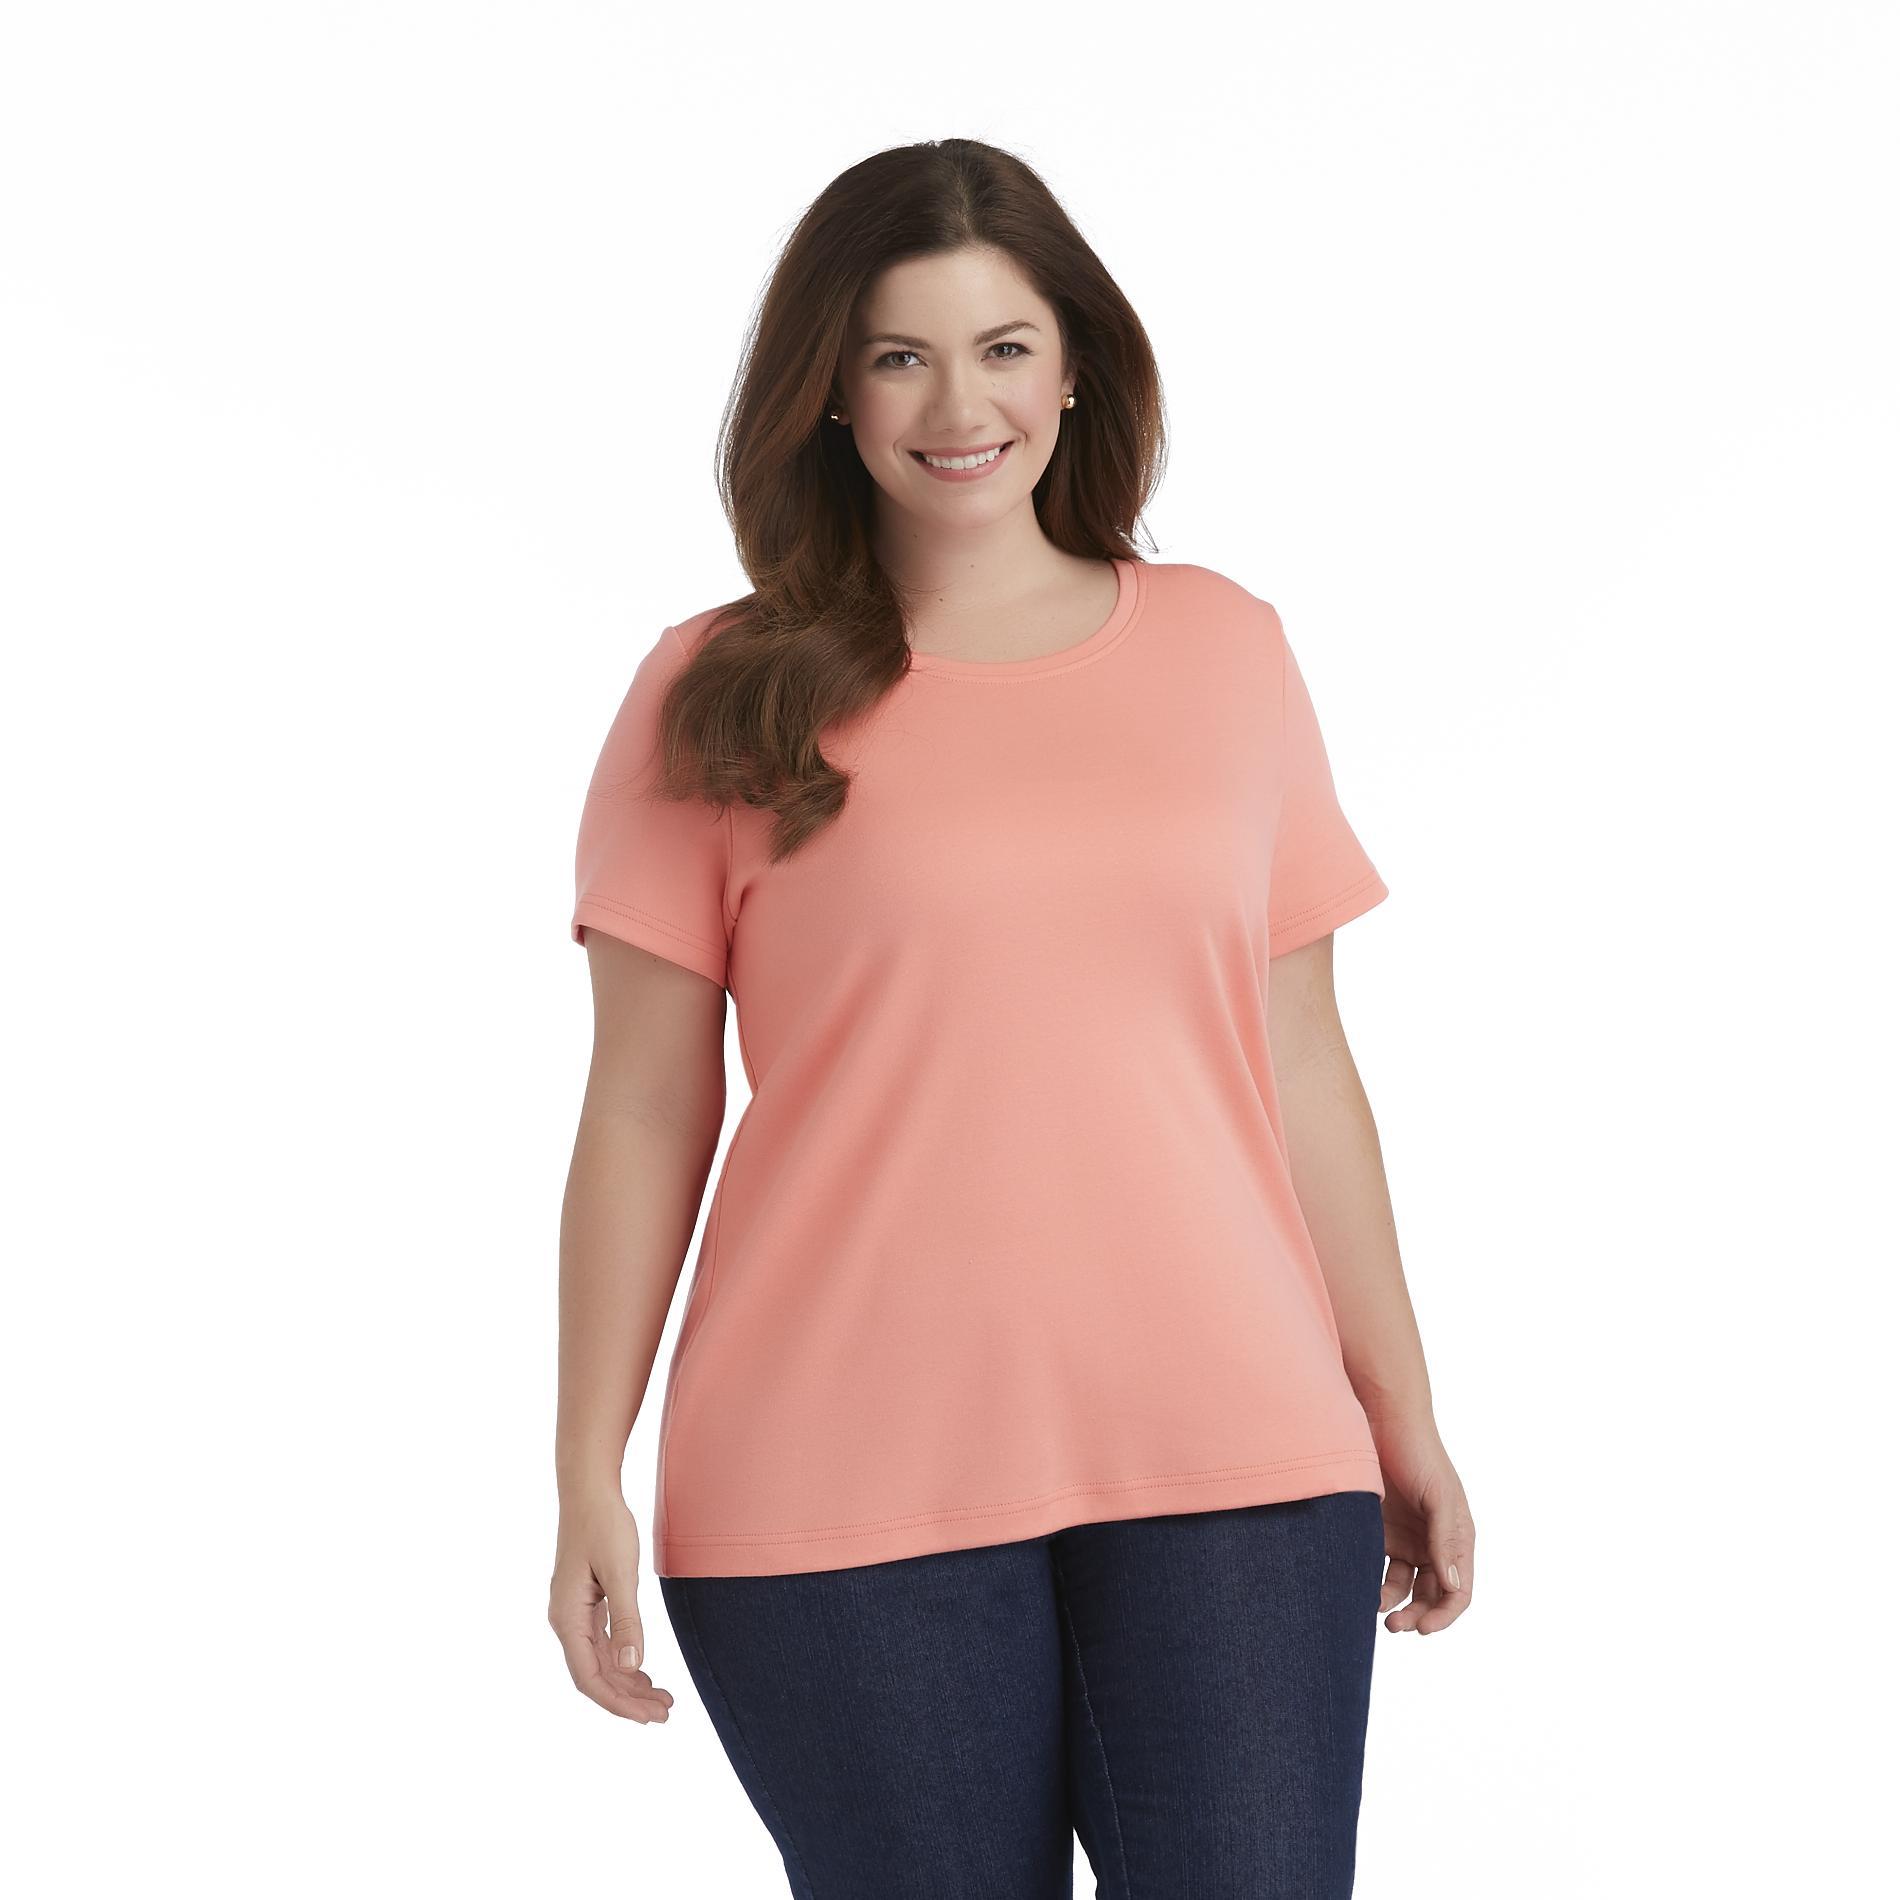 Basic Editions Women's Plus Relaxed Fit T-Shirt